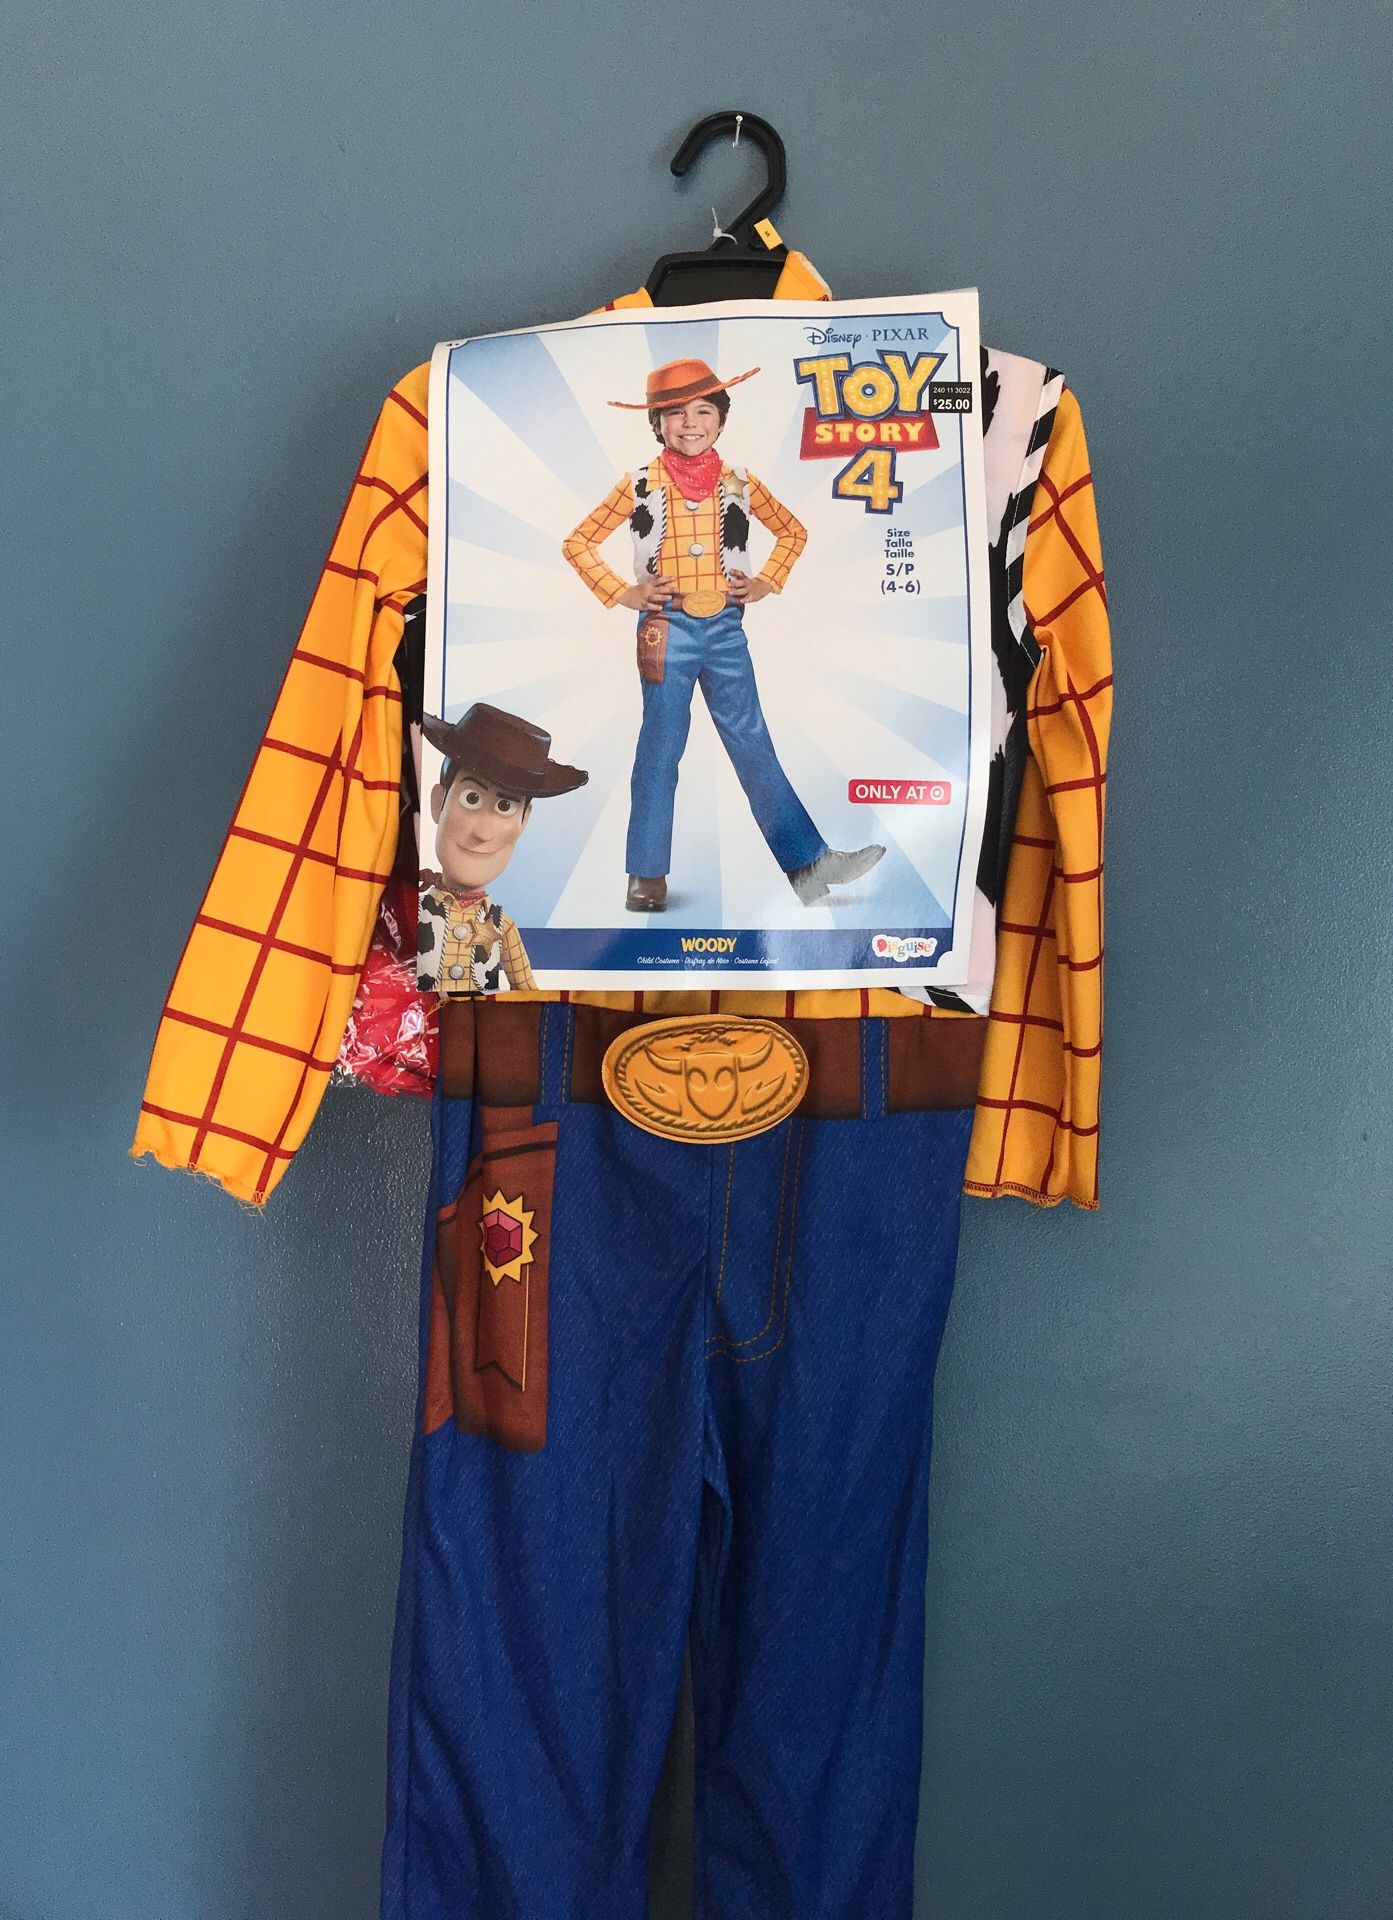 DISNEY TOY STORY4 WOODY COSTUME GREAT FOR BIRTHDAY OR DRESS UP KIDS SIZE SMALL 4/6